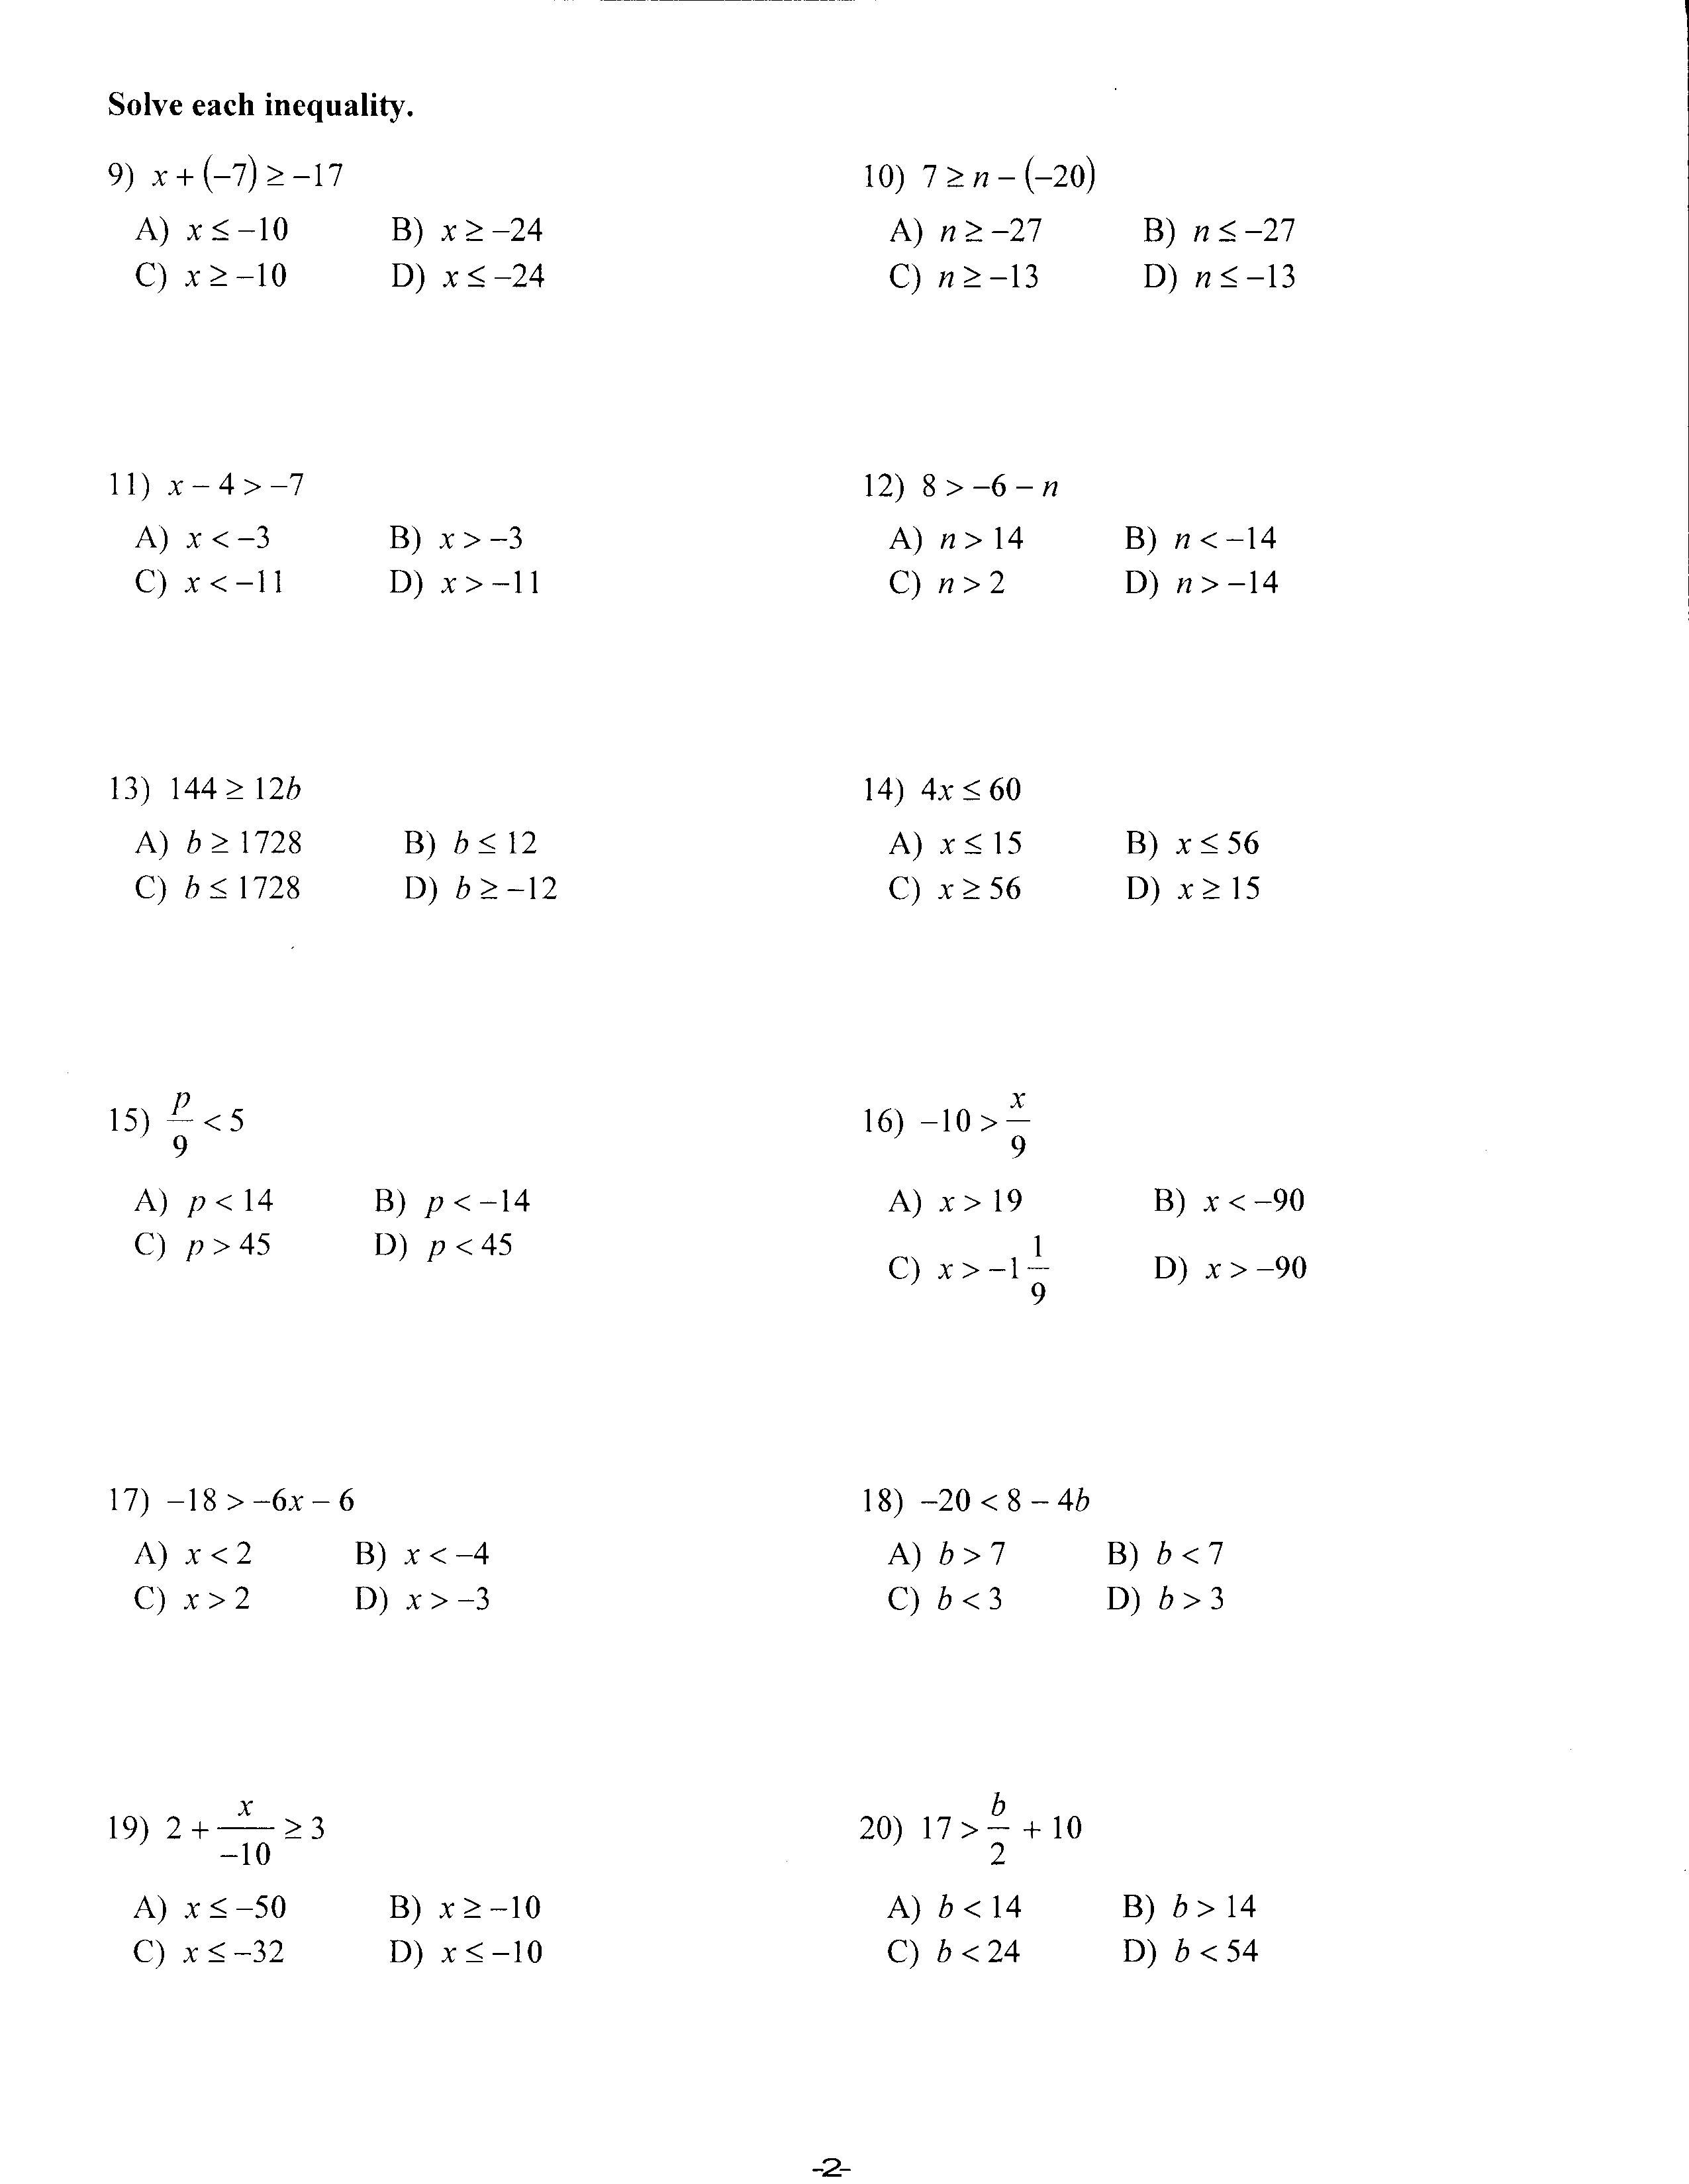 9-best-images-of-9th-grade-math-worksheets-with-answer-key-9th-grade-algebra-math-worksheets